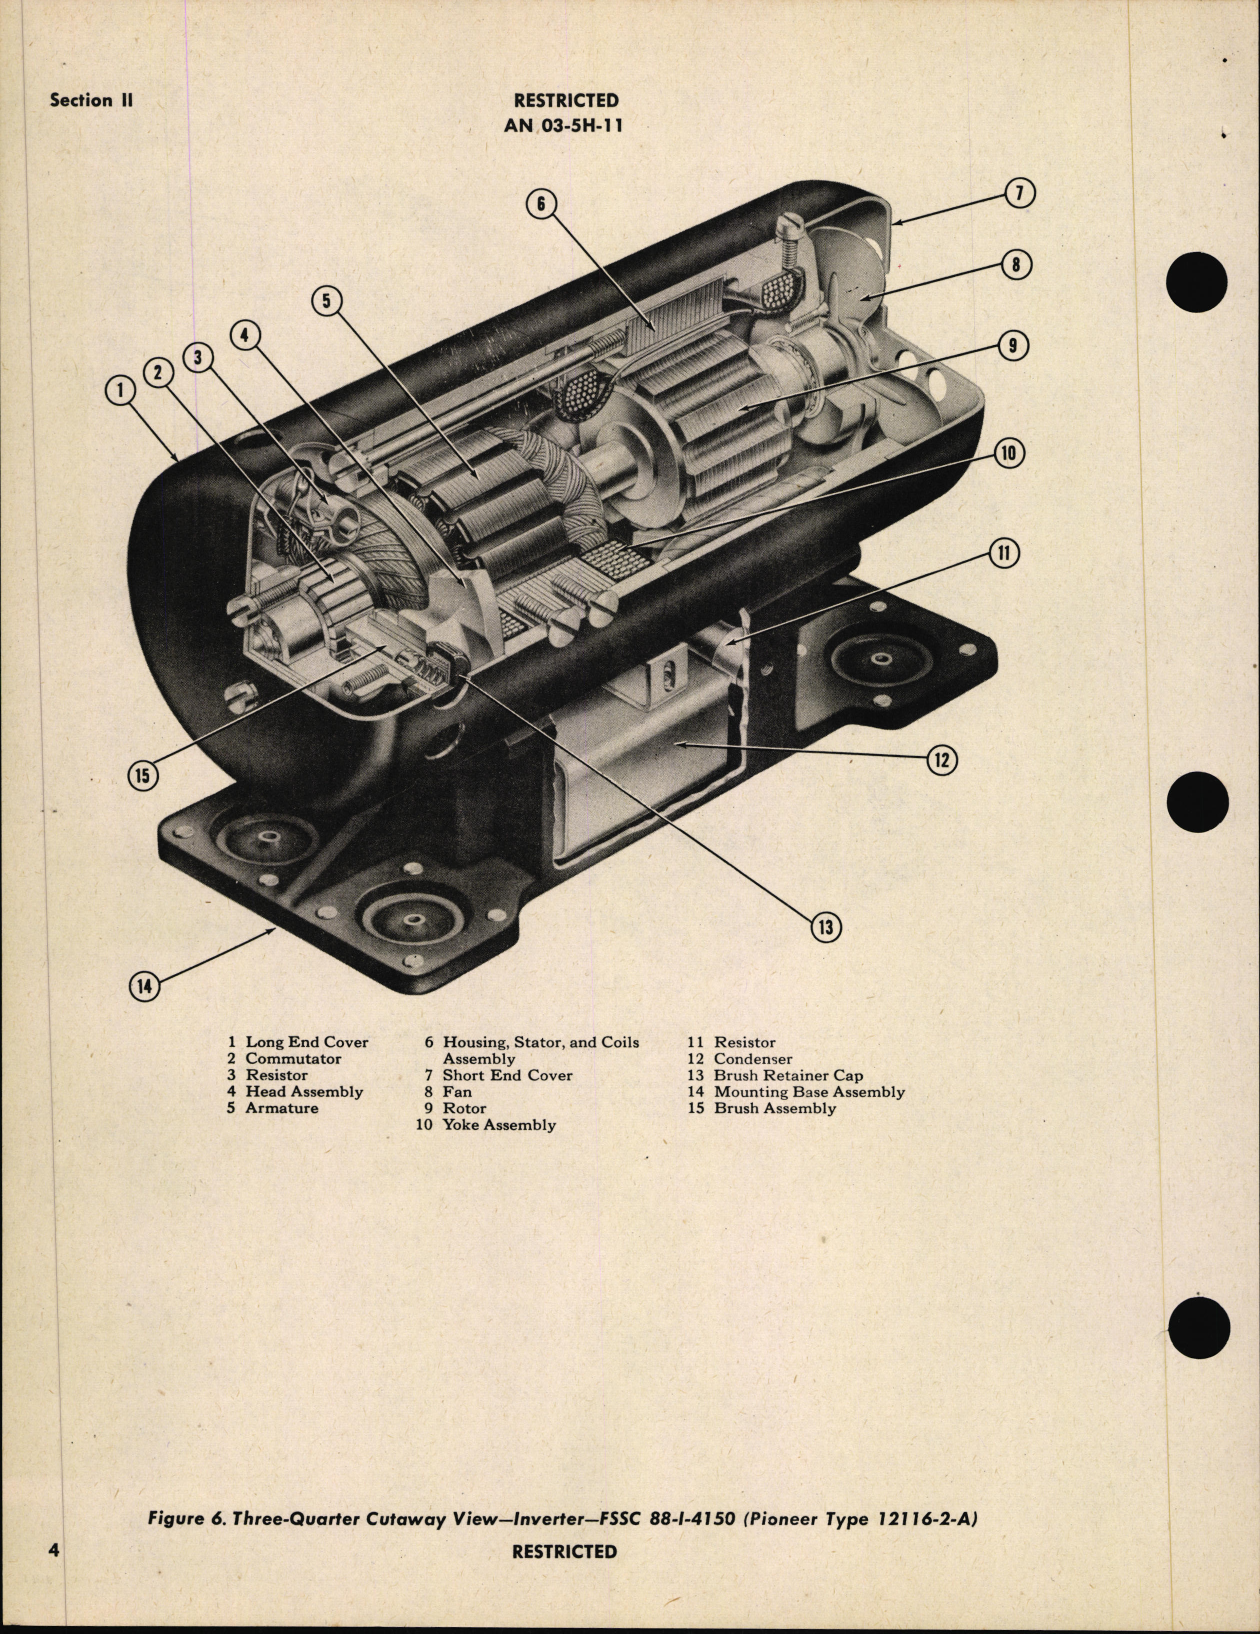 Sample page 8 from AirCorps Library document: Handbook of Instructions with Parts Catalog for Inverters